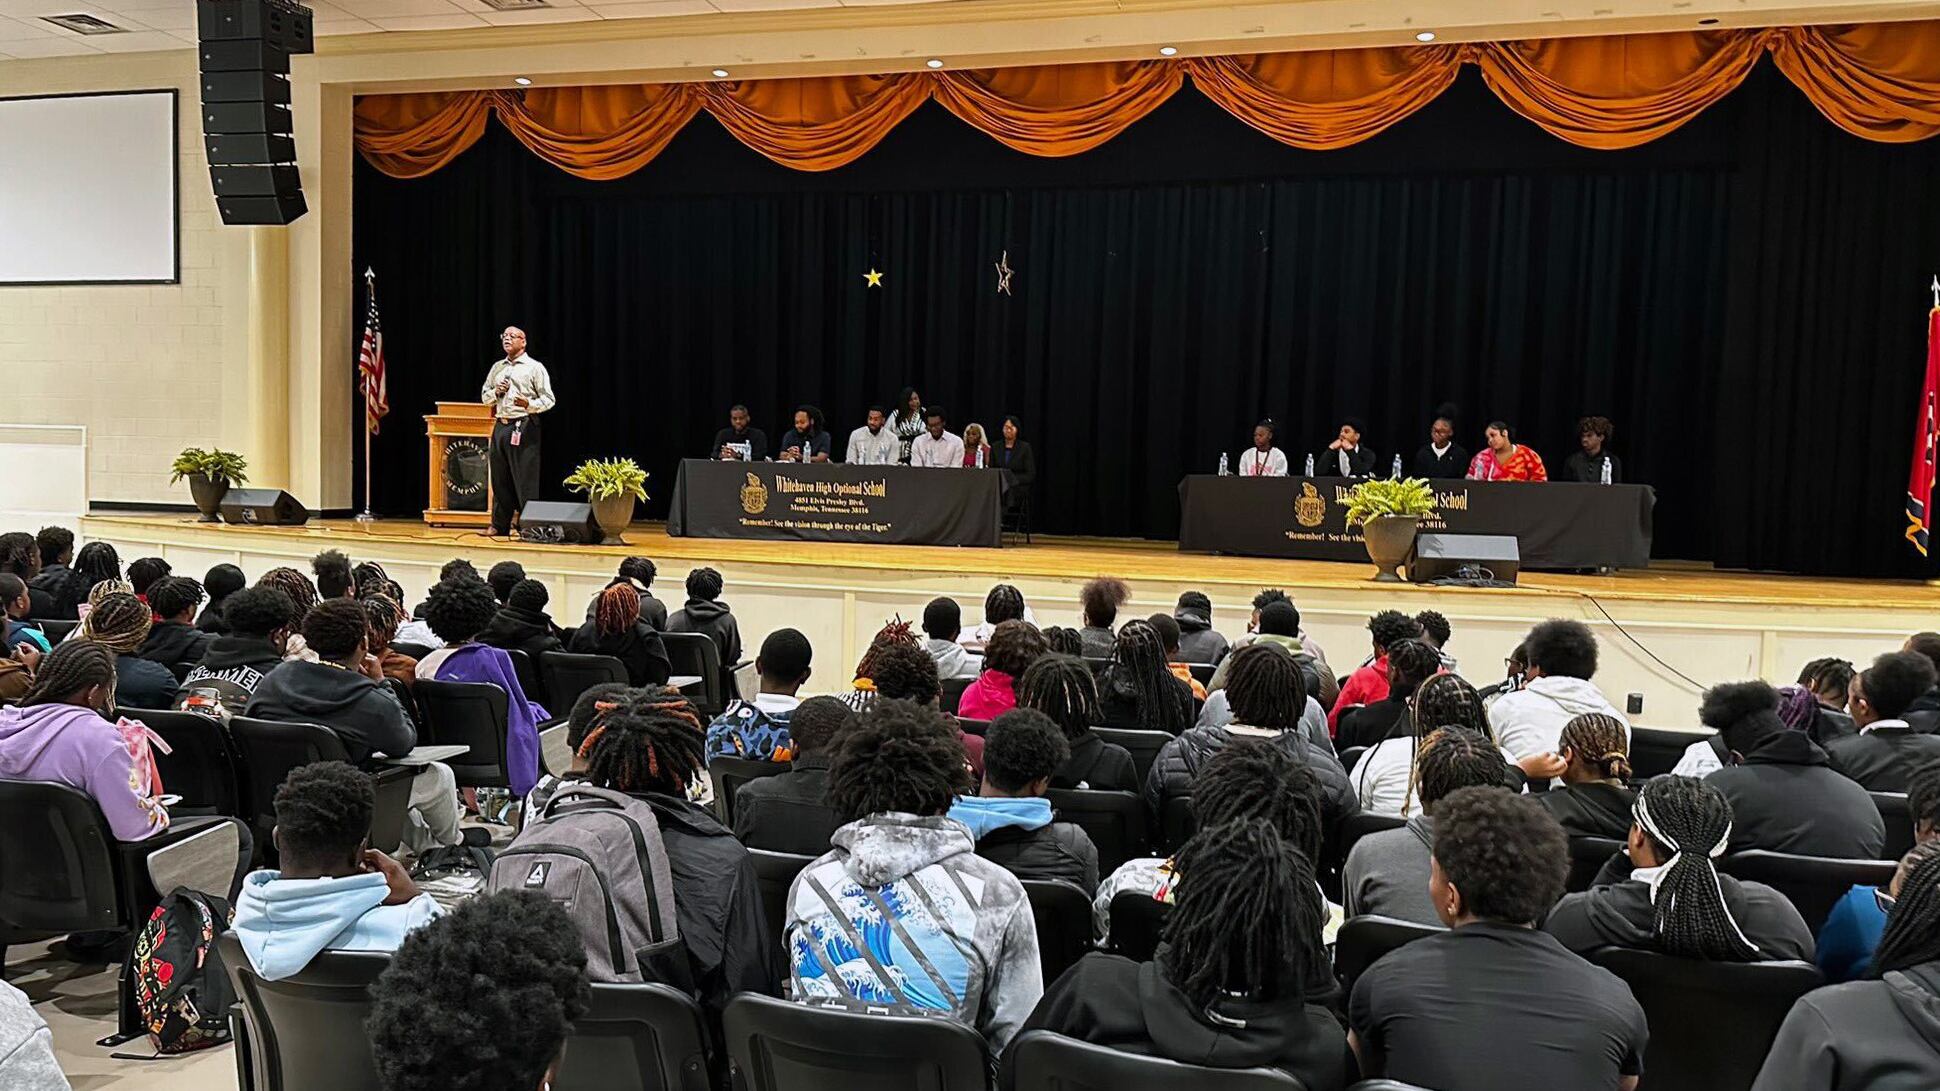 Several students are facing a stage. On stage are two small tables with speakers, and a podium with a speaker.